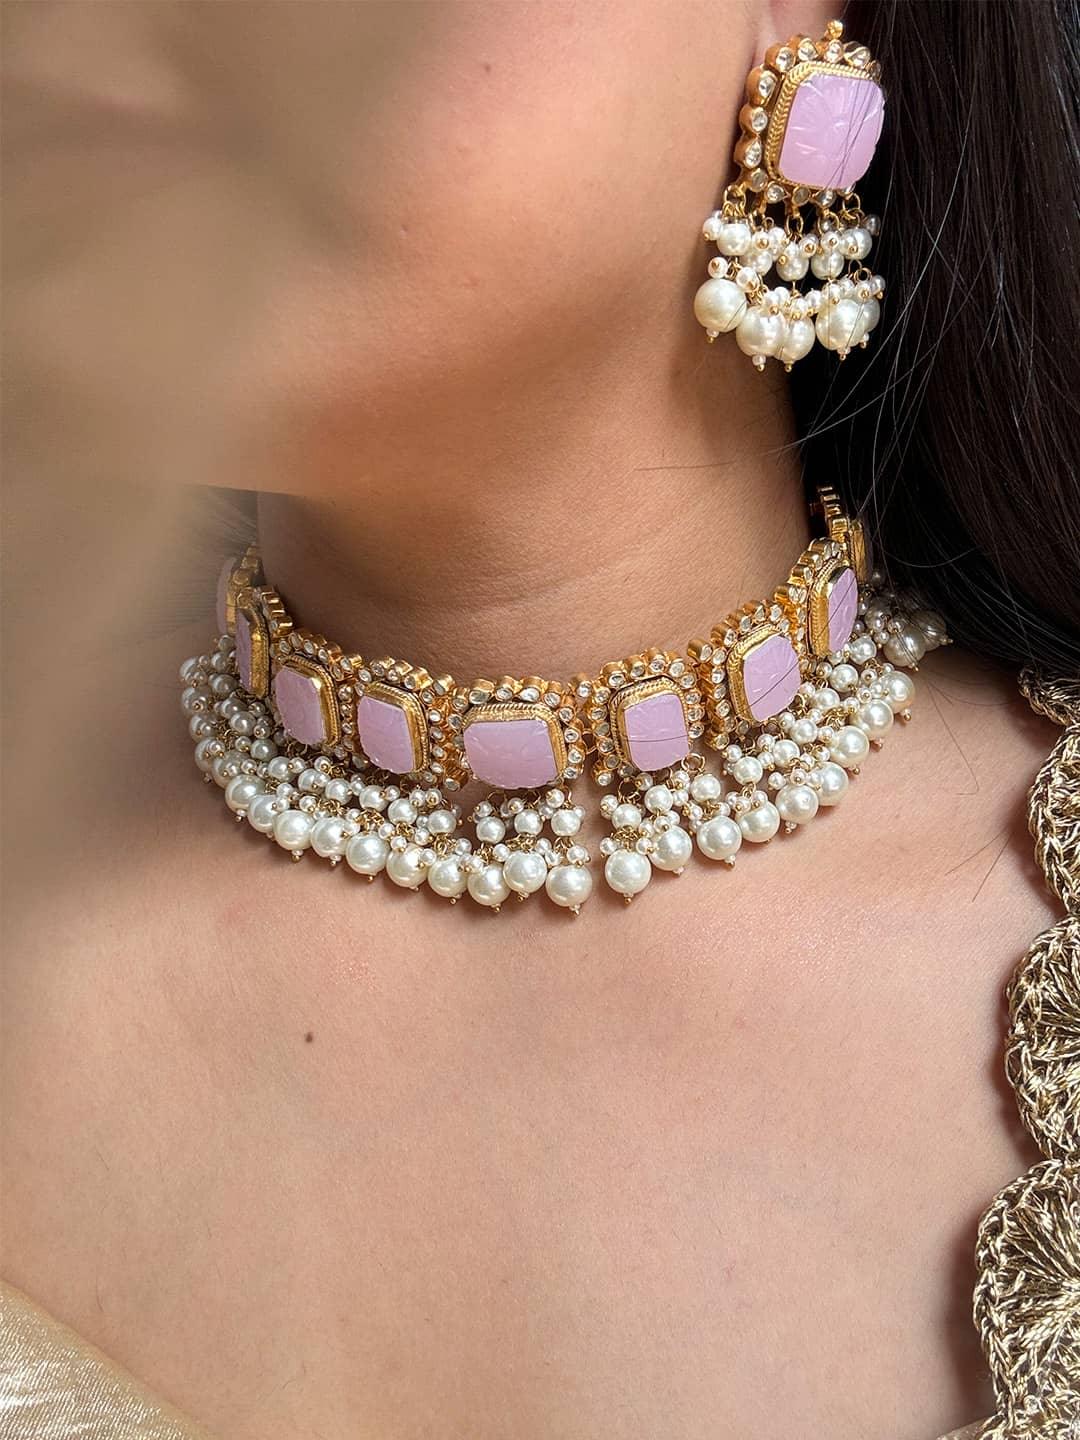 Ishhaara Pink Antique Gold Choker Necklace With Pearl Beads